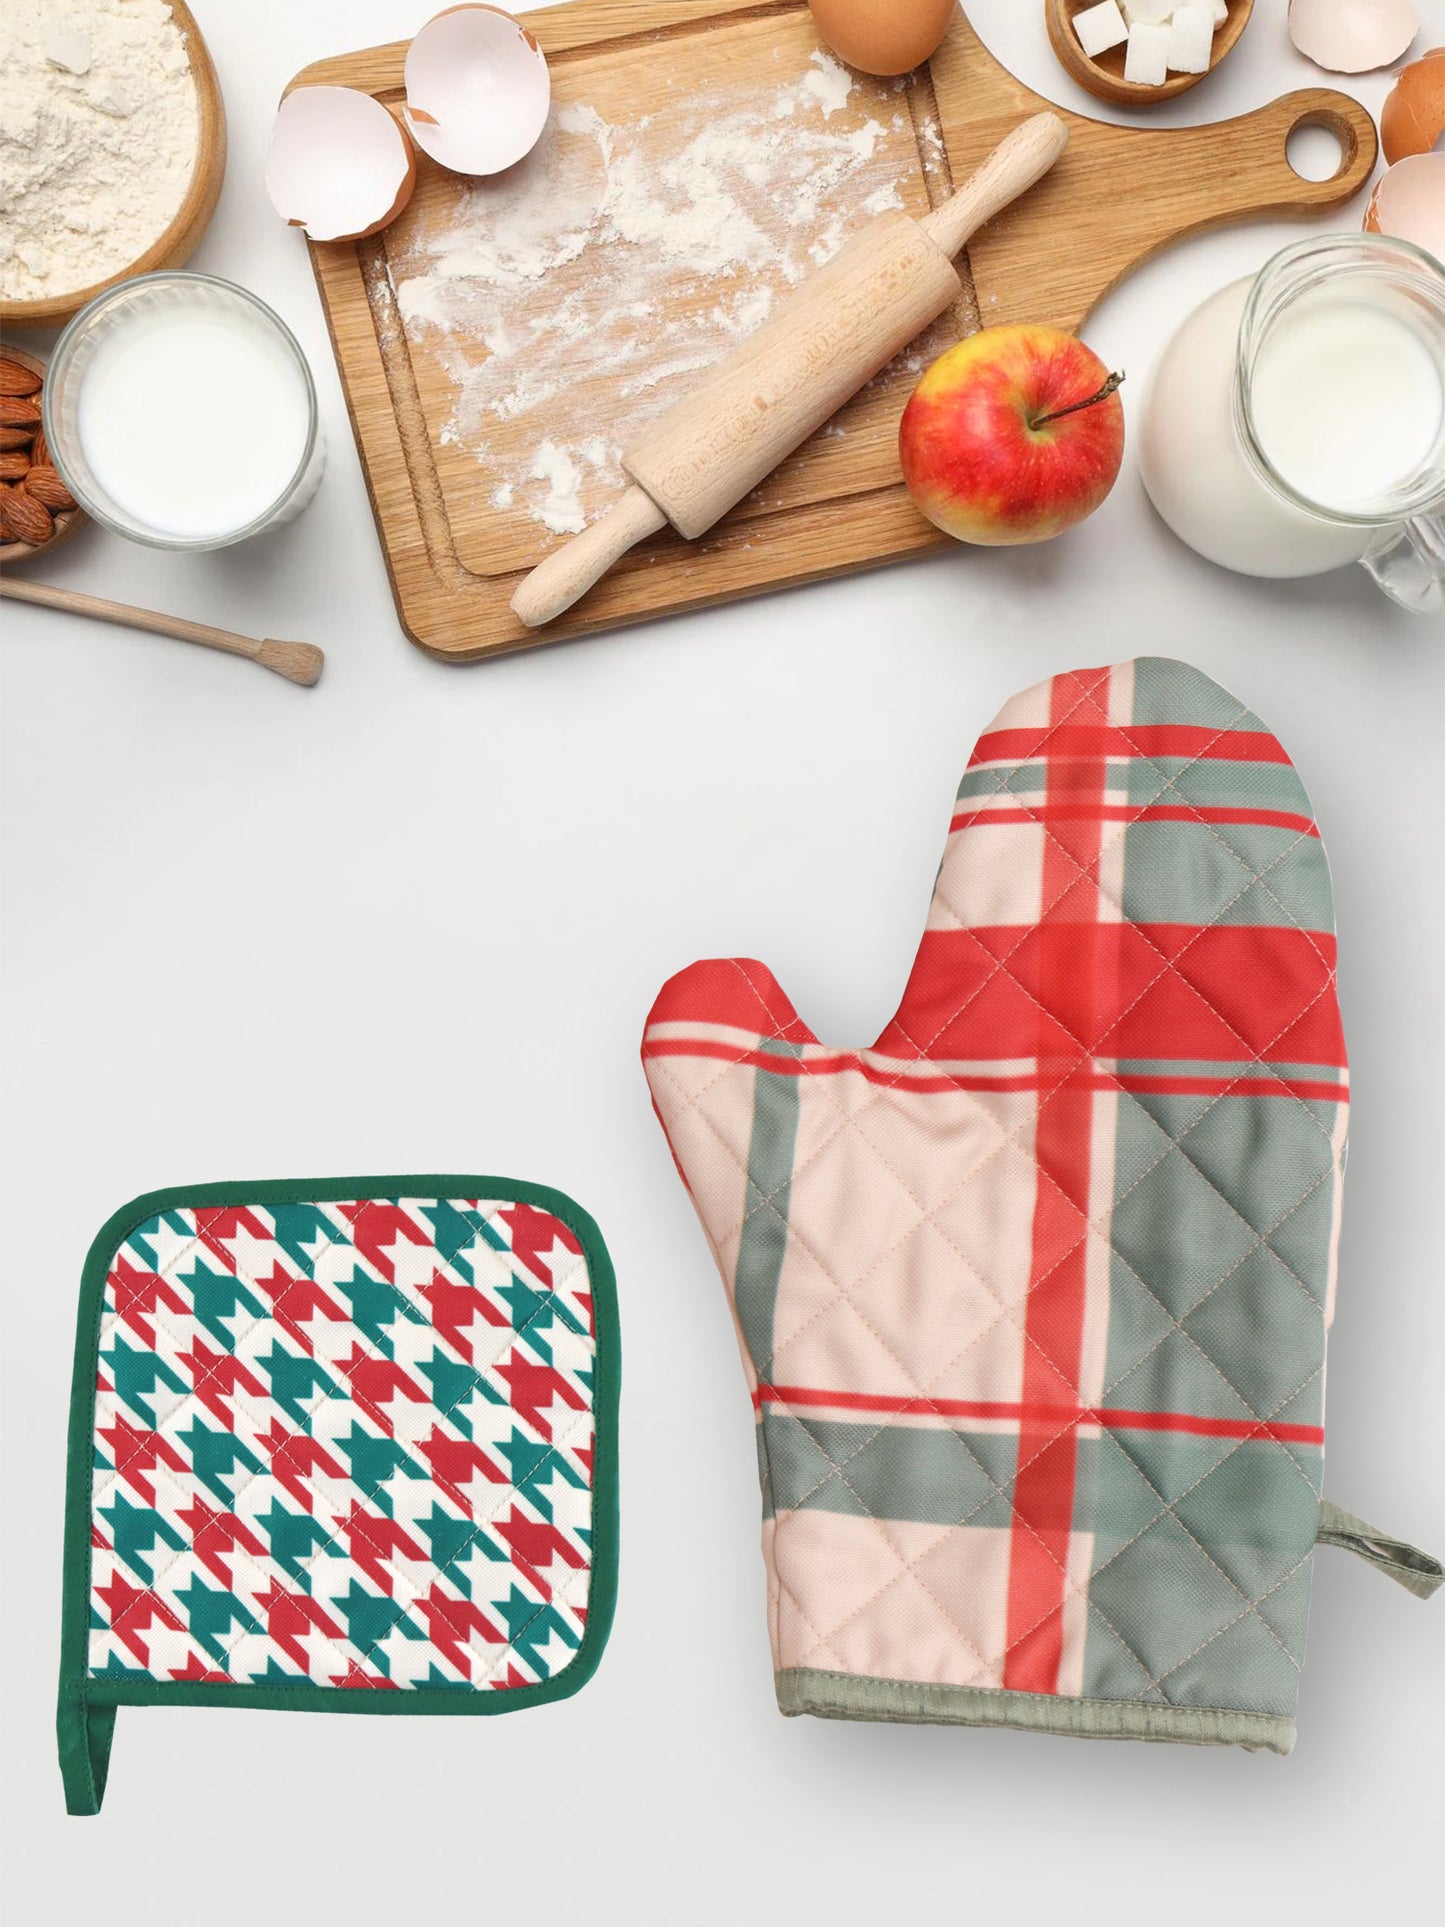 Pot Holder Checks and Floral Padded Oven Mitten - Heat Resistant - Cotton Blend Red Green - 7in x 7in, 5.5in x 10.5in